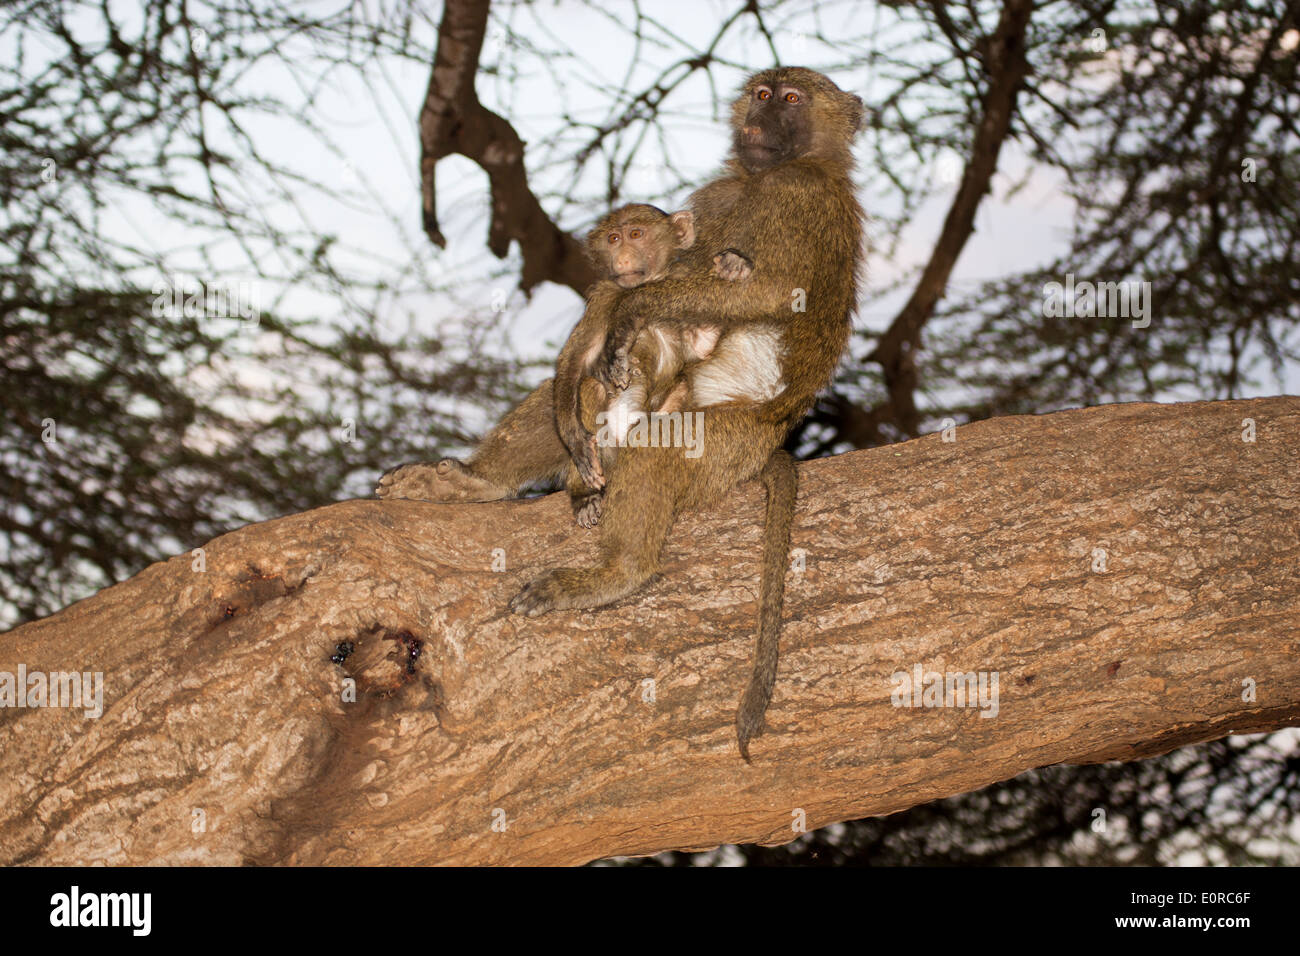 baby Olive baboon (Papio anubis). Photographed in Tanzania Stock Photo